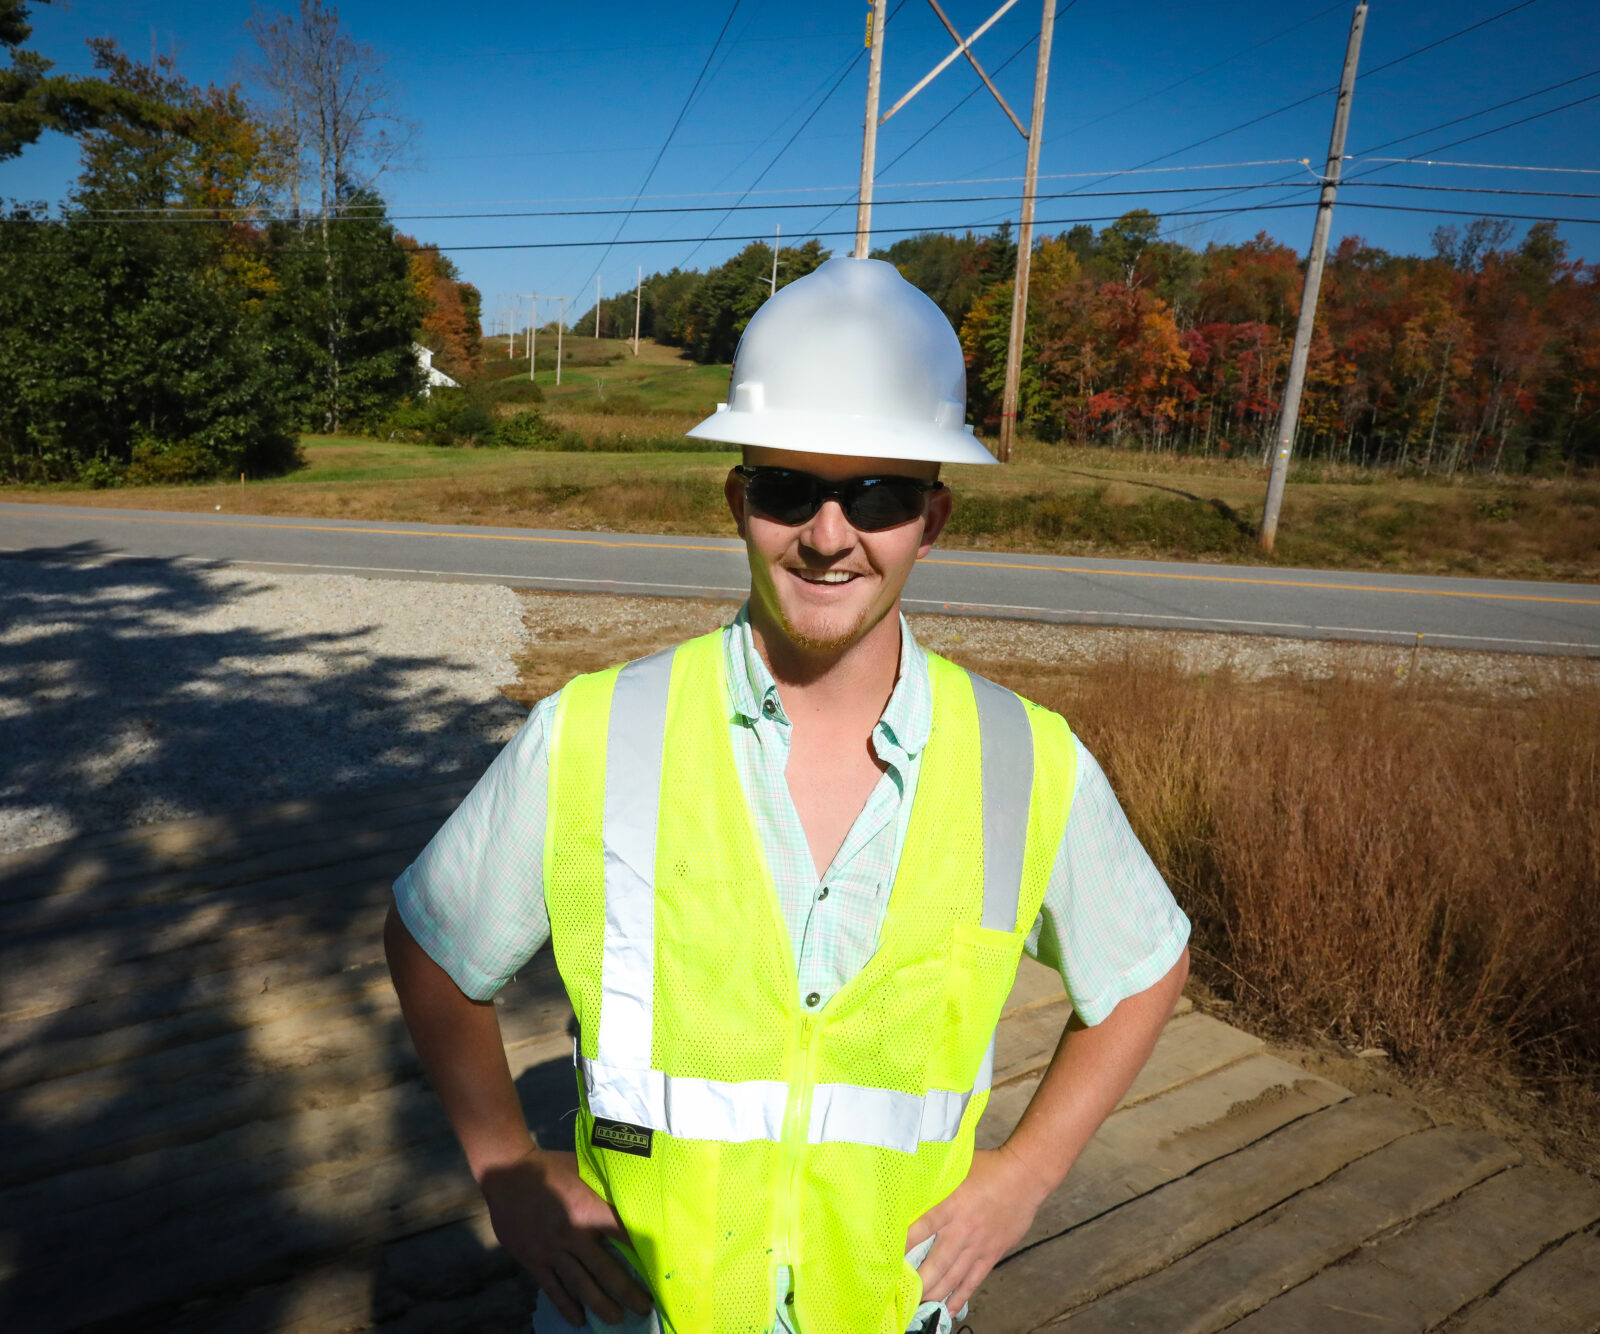 Construction crew member poses in front of power lines